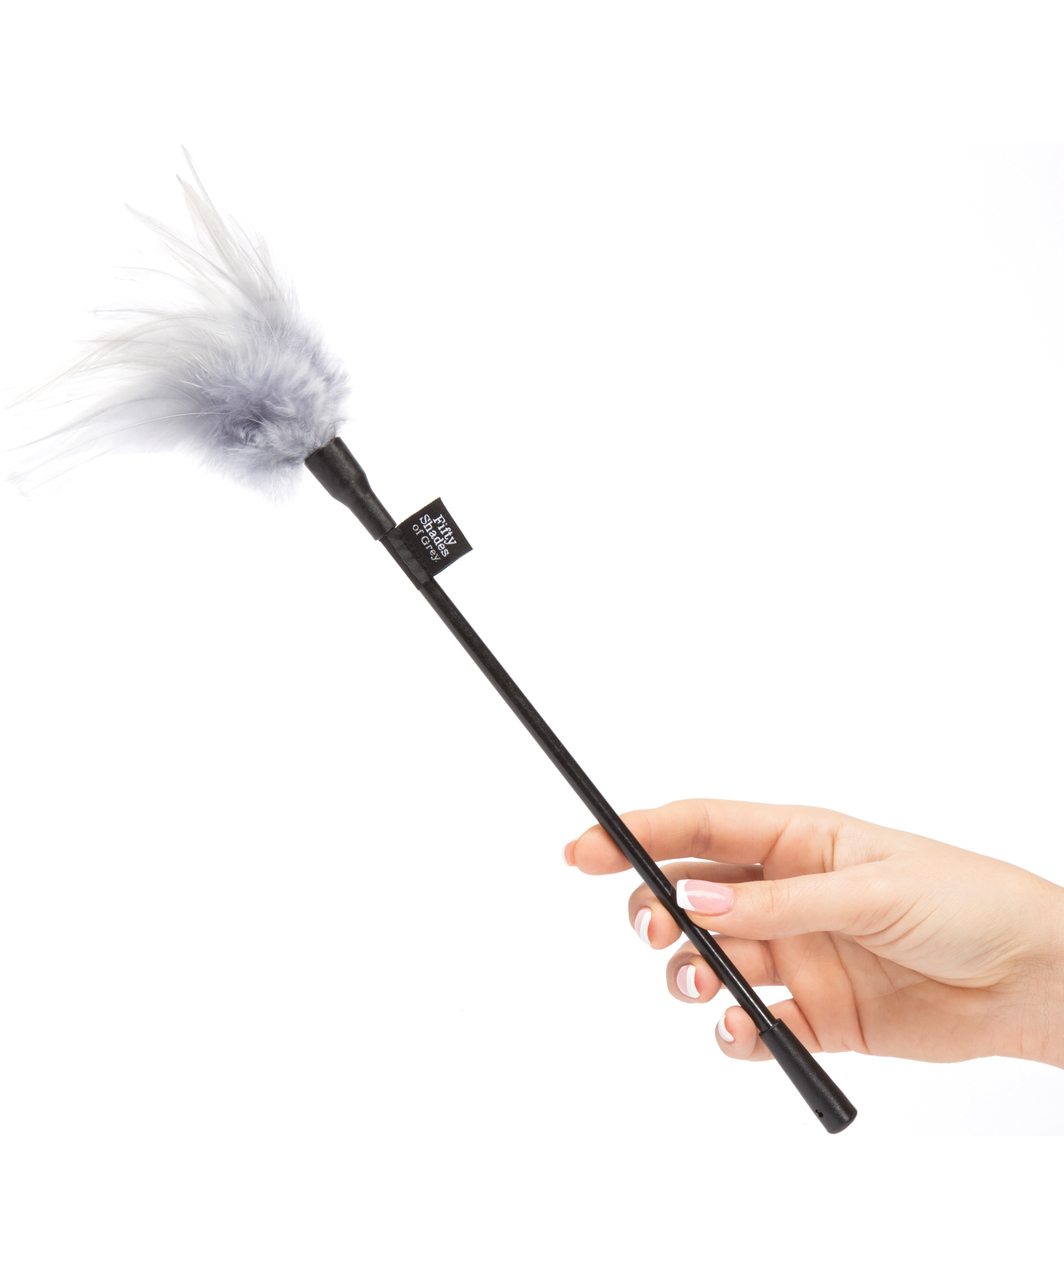 Fifty Shades of Grey Tease feather tickler